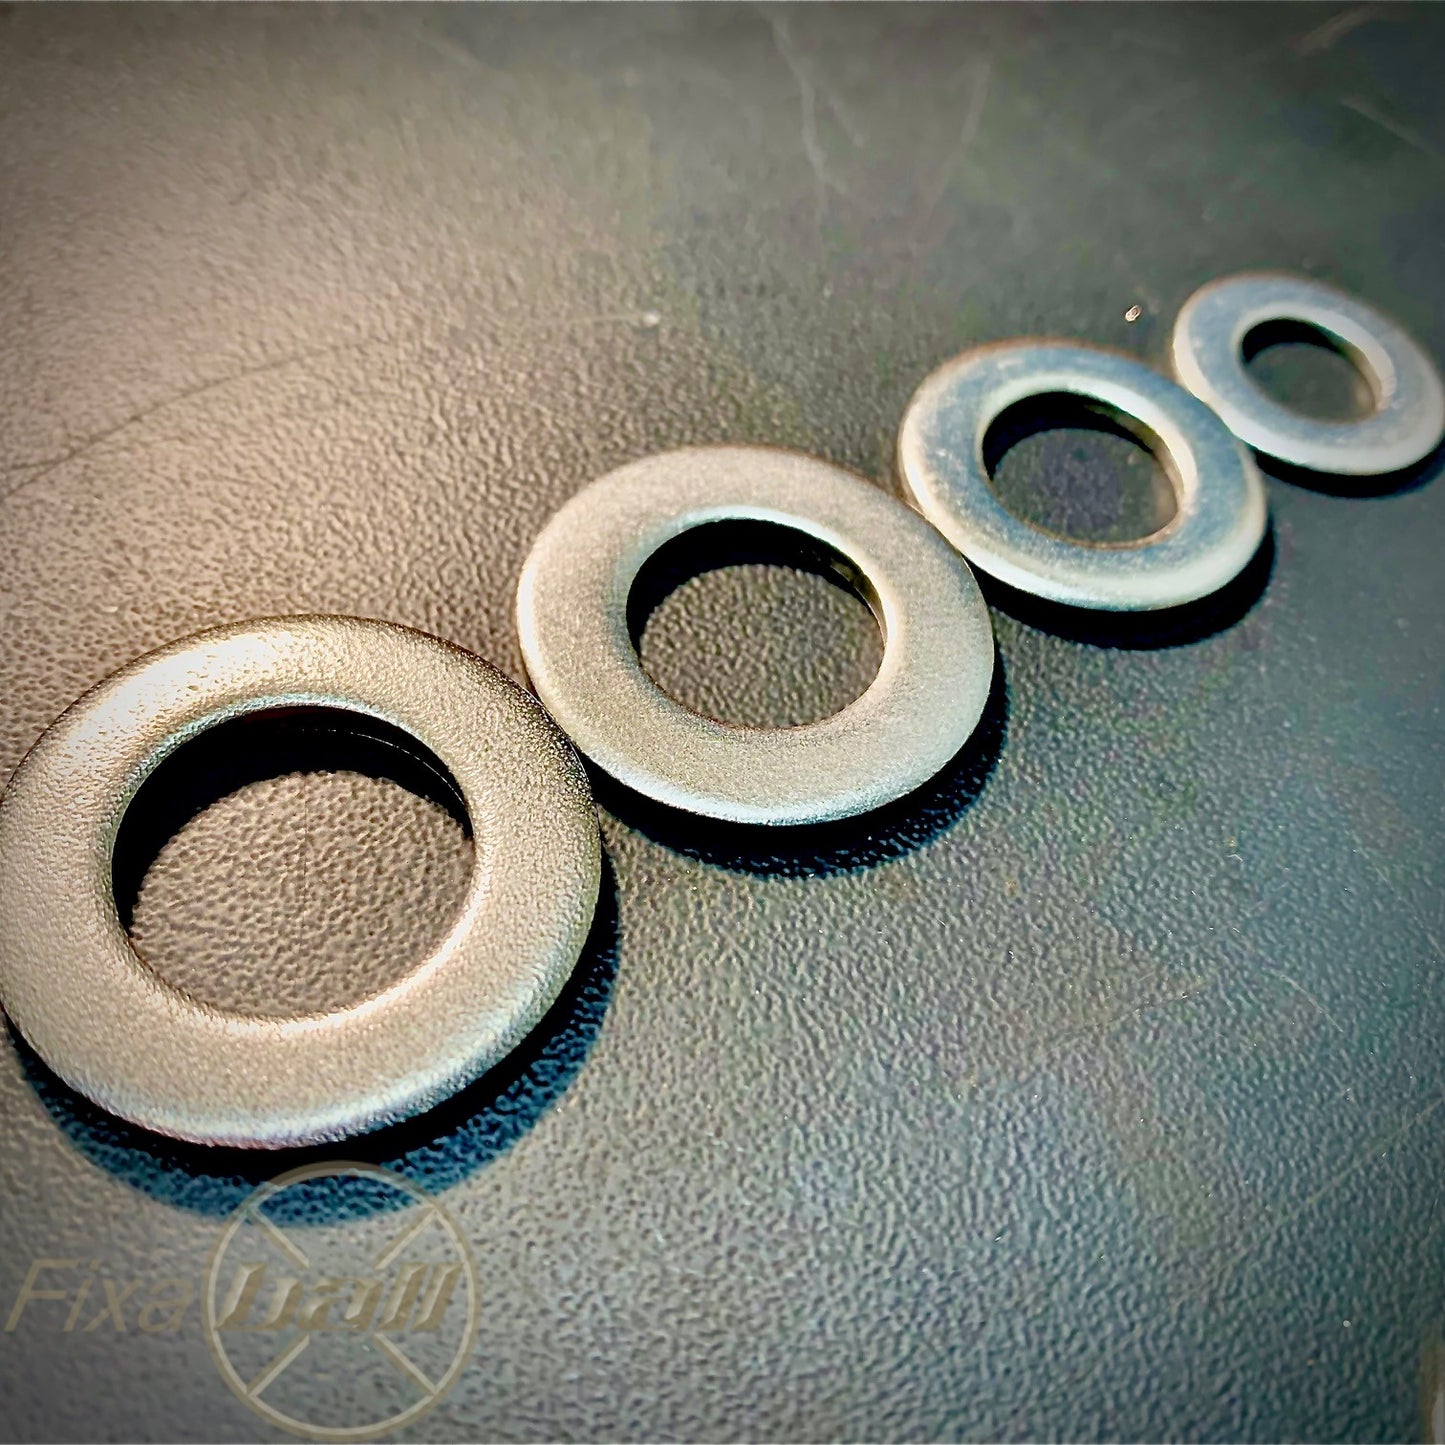 M2 - M20 Washers, Form A, A2/ 304 Stainless Steel, DIN 125 Washers M2 - M20 Washers, Form A, A2/ 304 Stainless Steel, DIN 125 Washers - Form A